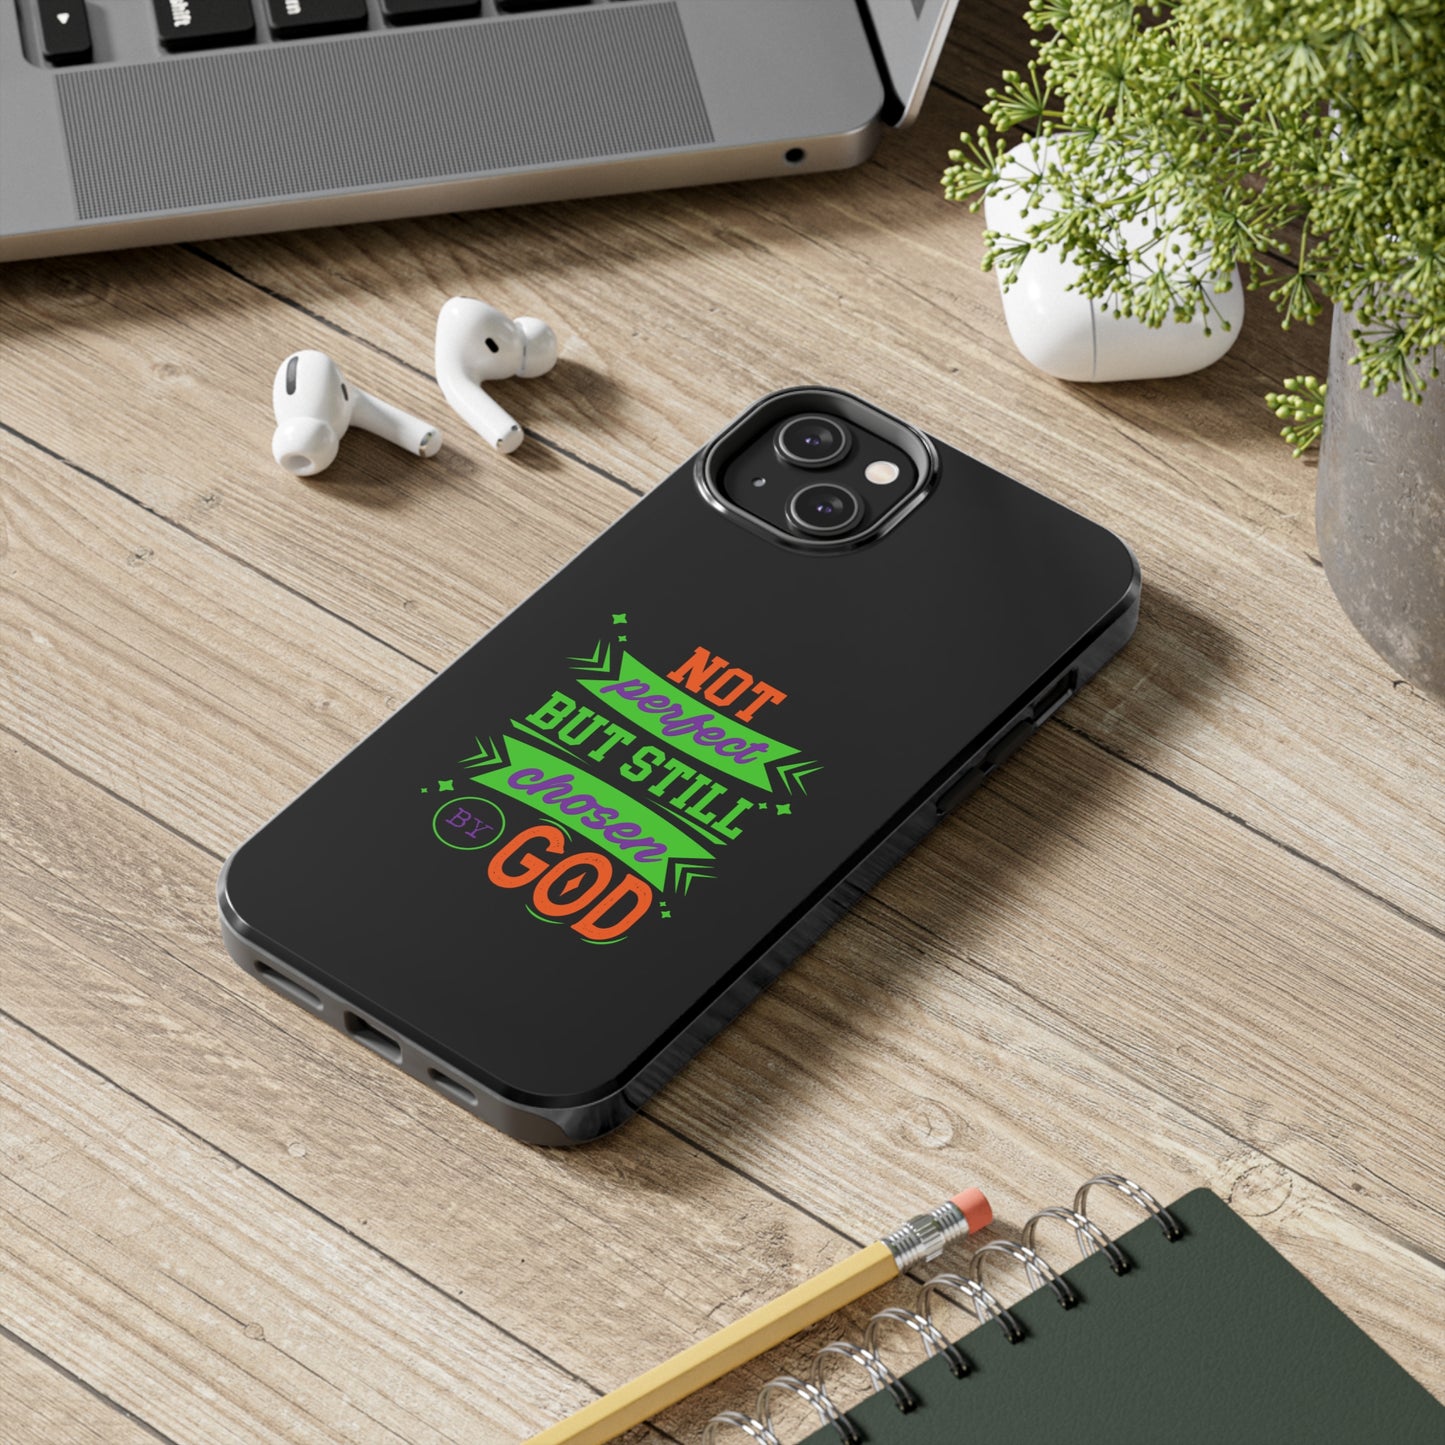 Not Perfect But Still Chosen By God Tough Phone Cases, Case-Mate